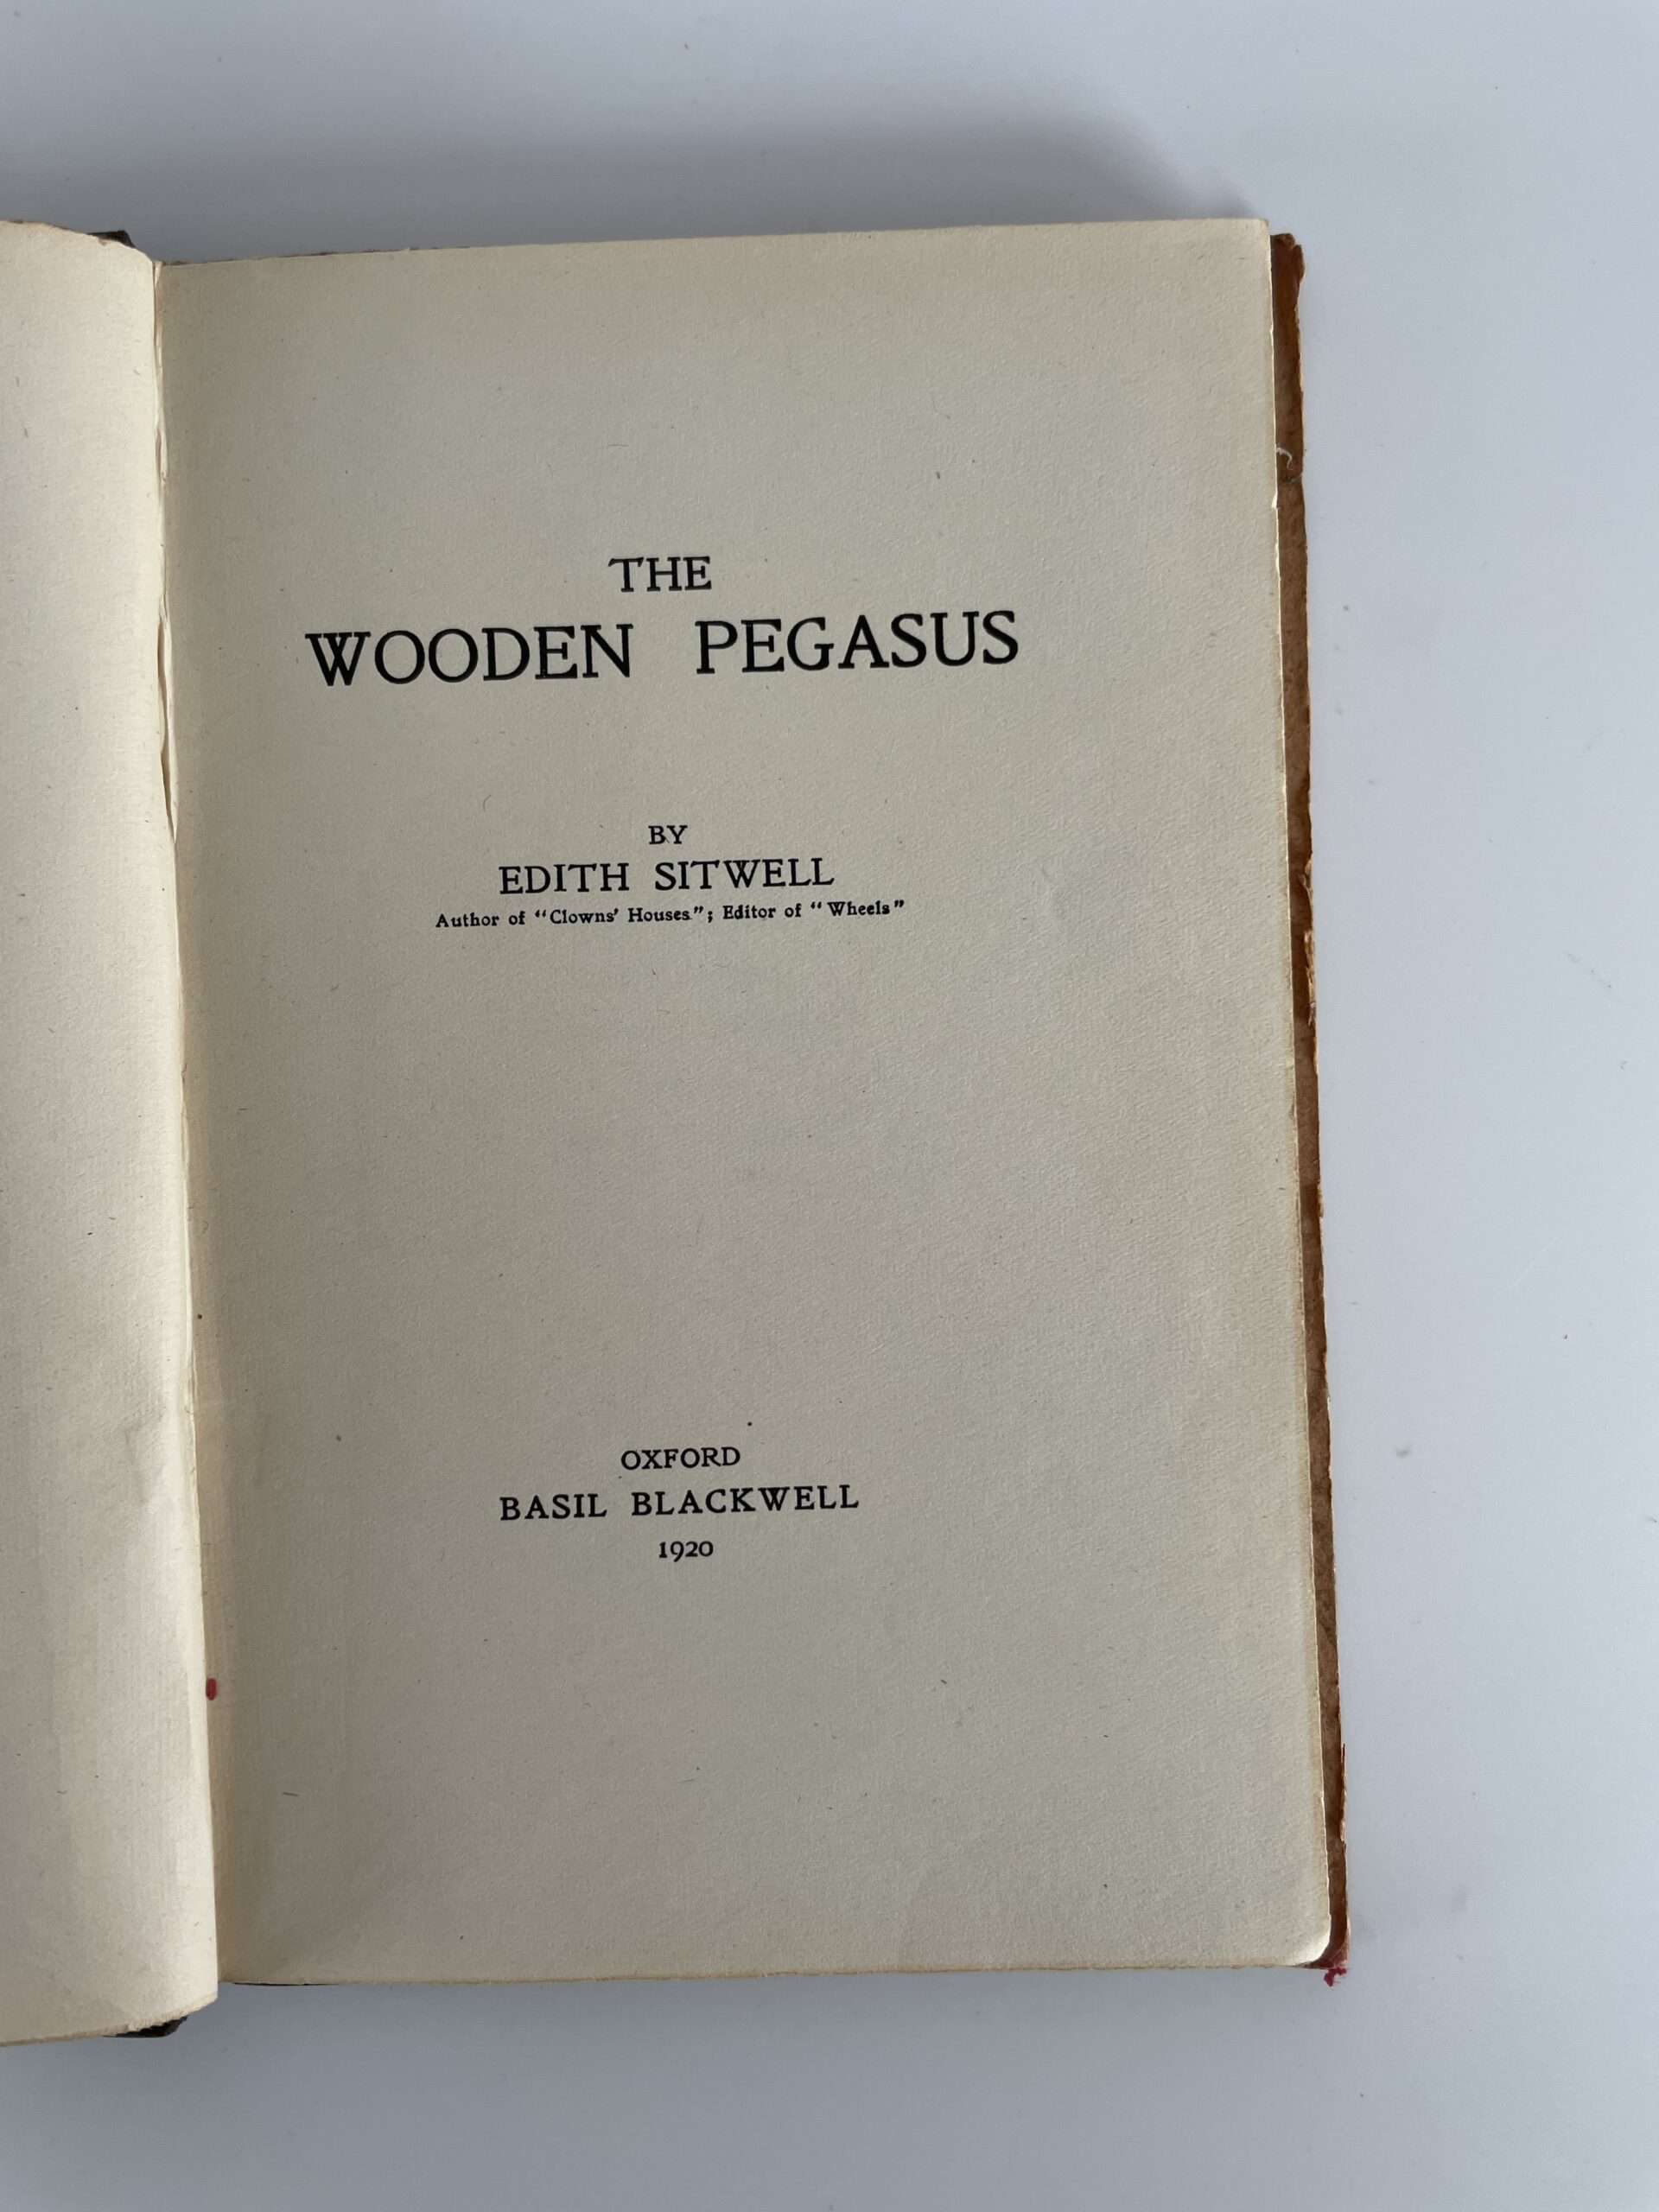 edith sitwell the wooden pegasus signed 1st 3